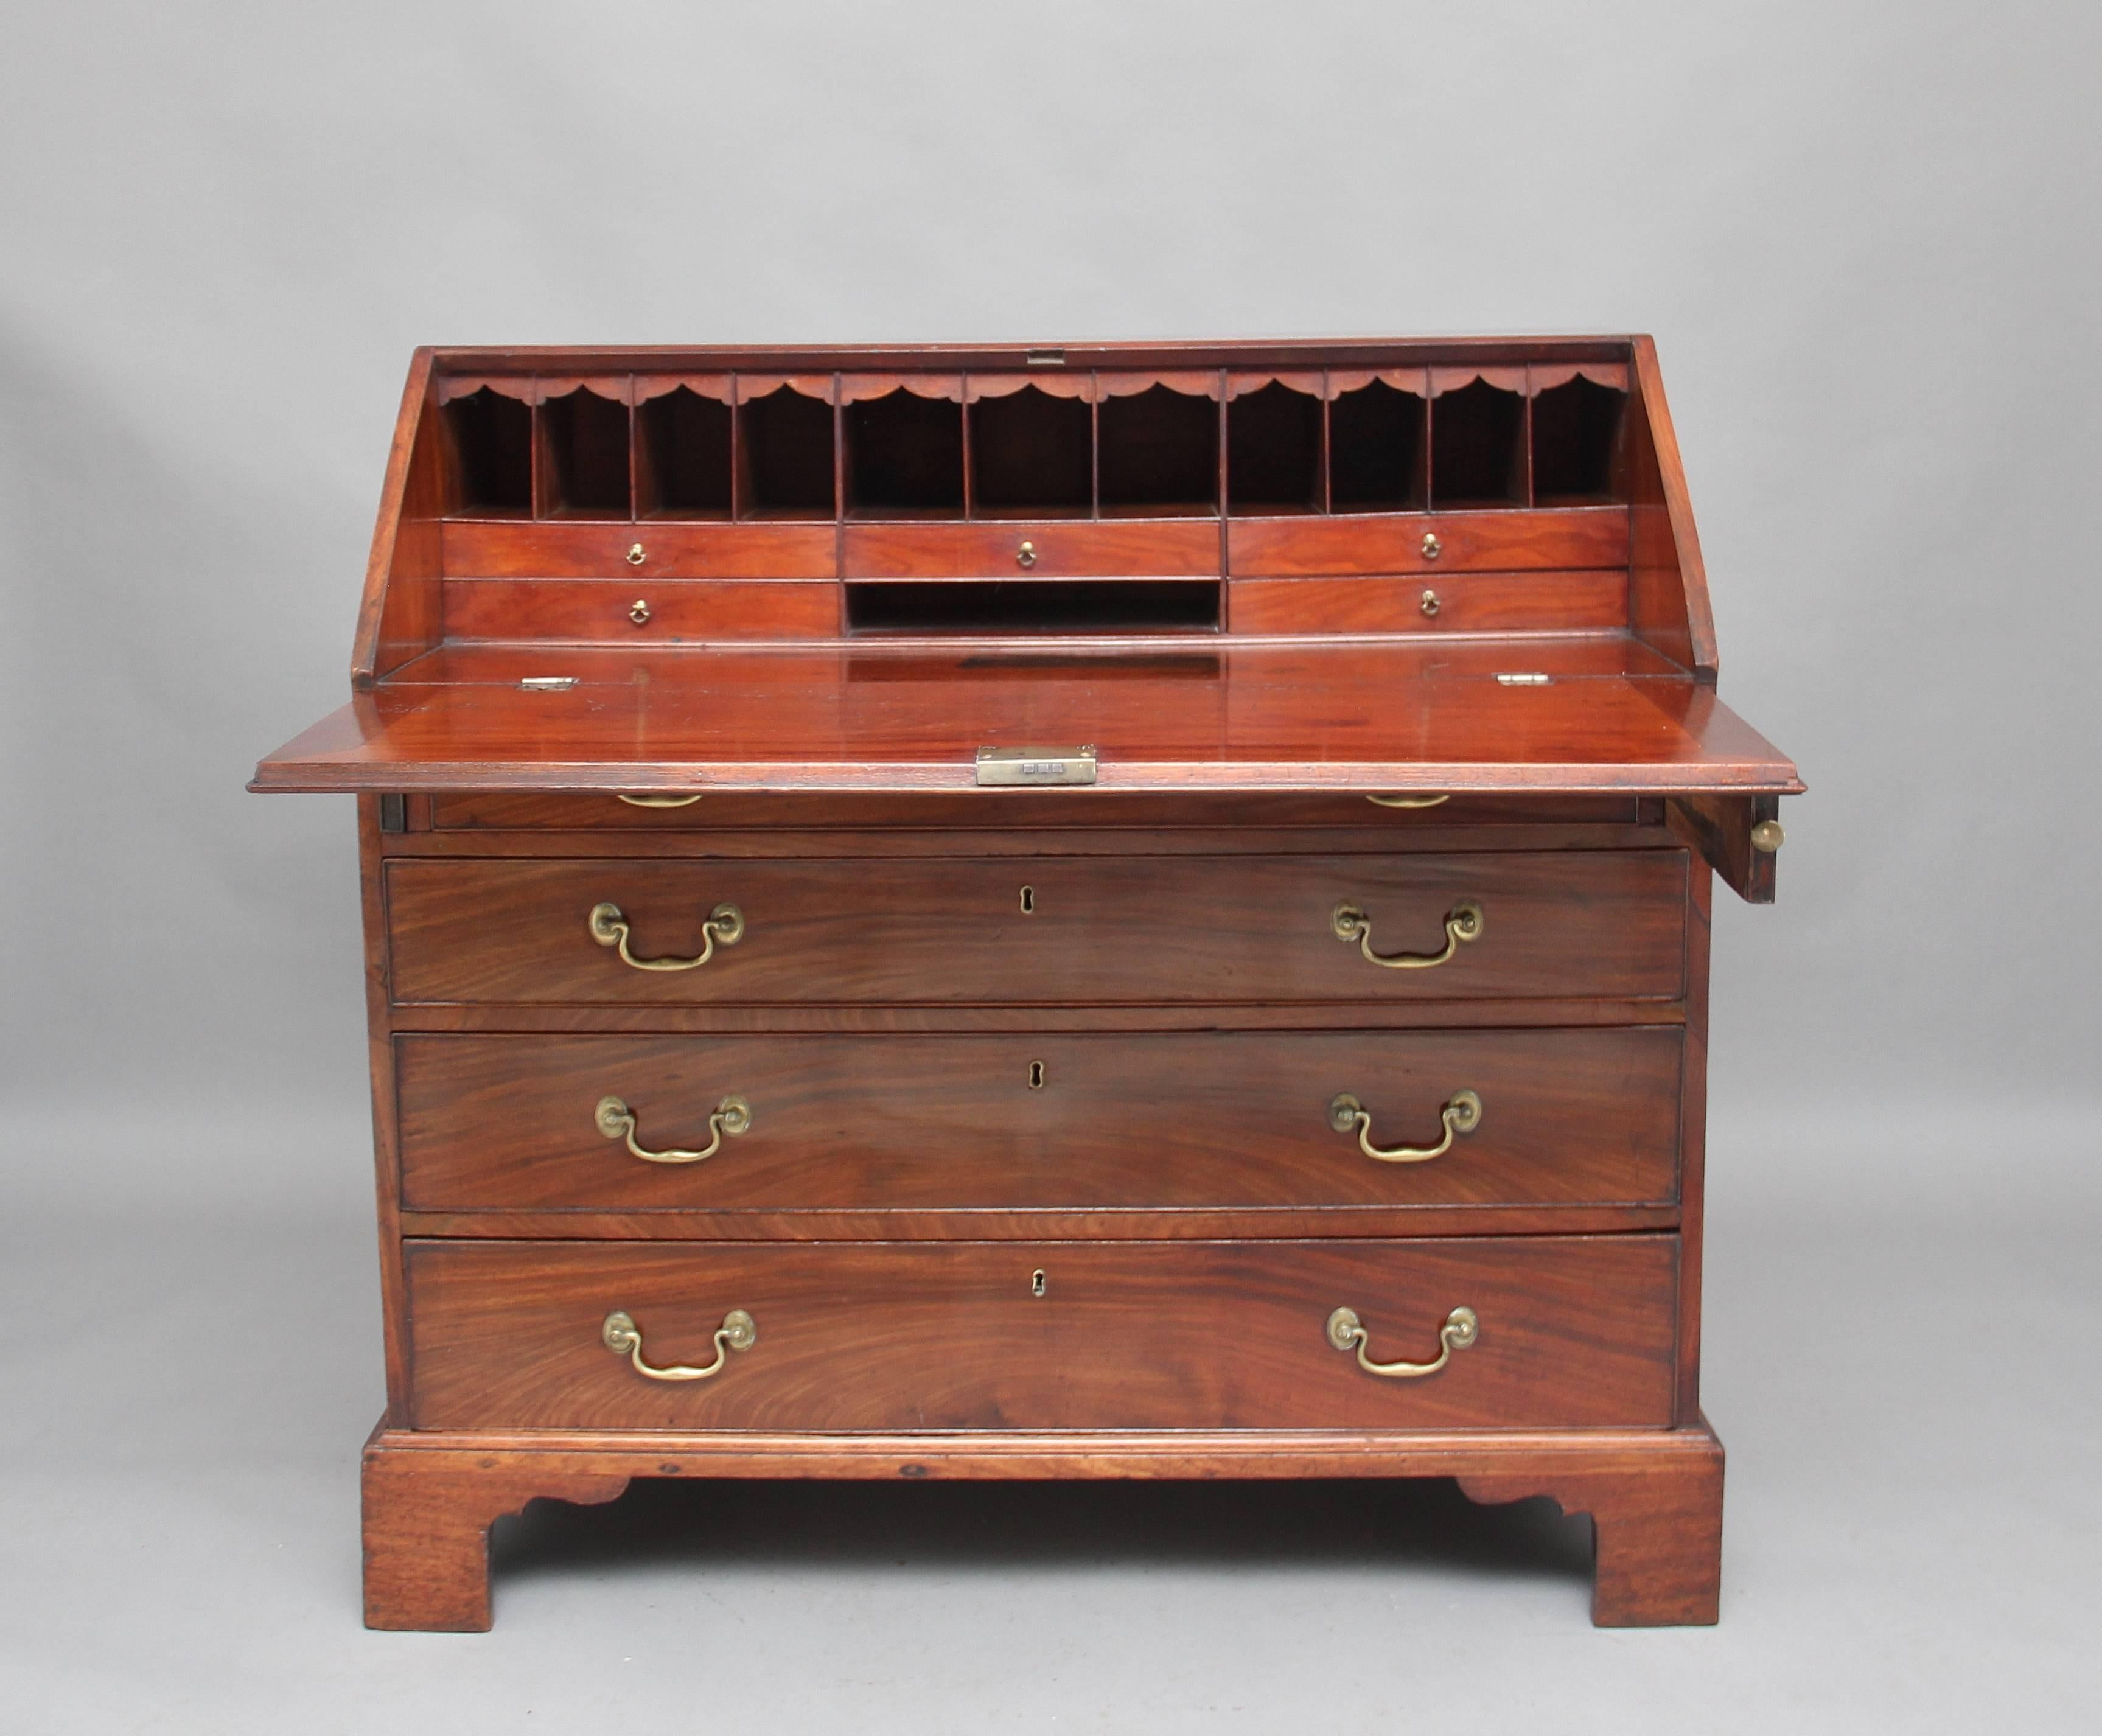 18th Century mahogany Georgian bureau, having a lovely fitted interior with various drawers and compartments, the bureau itself having four graduated oak lined drawers with original brass swan neck handles, standing on bracket feet.  Circa 1780.